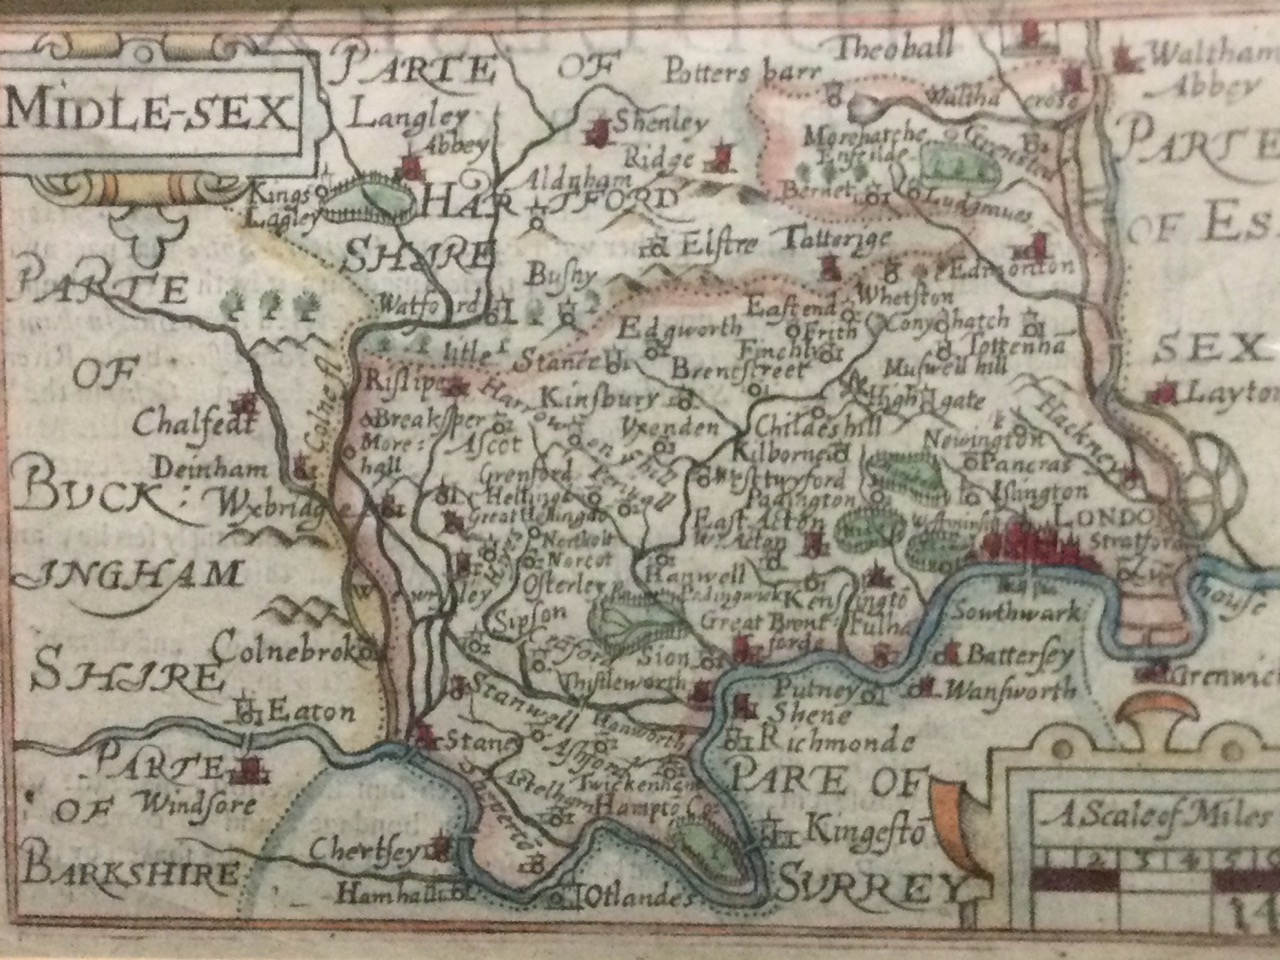 An eighteenth century map of Midle-sex, the small handcoloured plate attributed to P Keer and Pieter